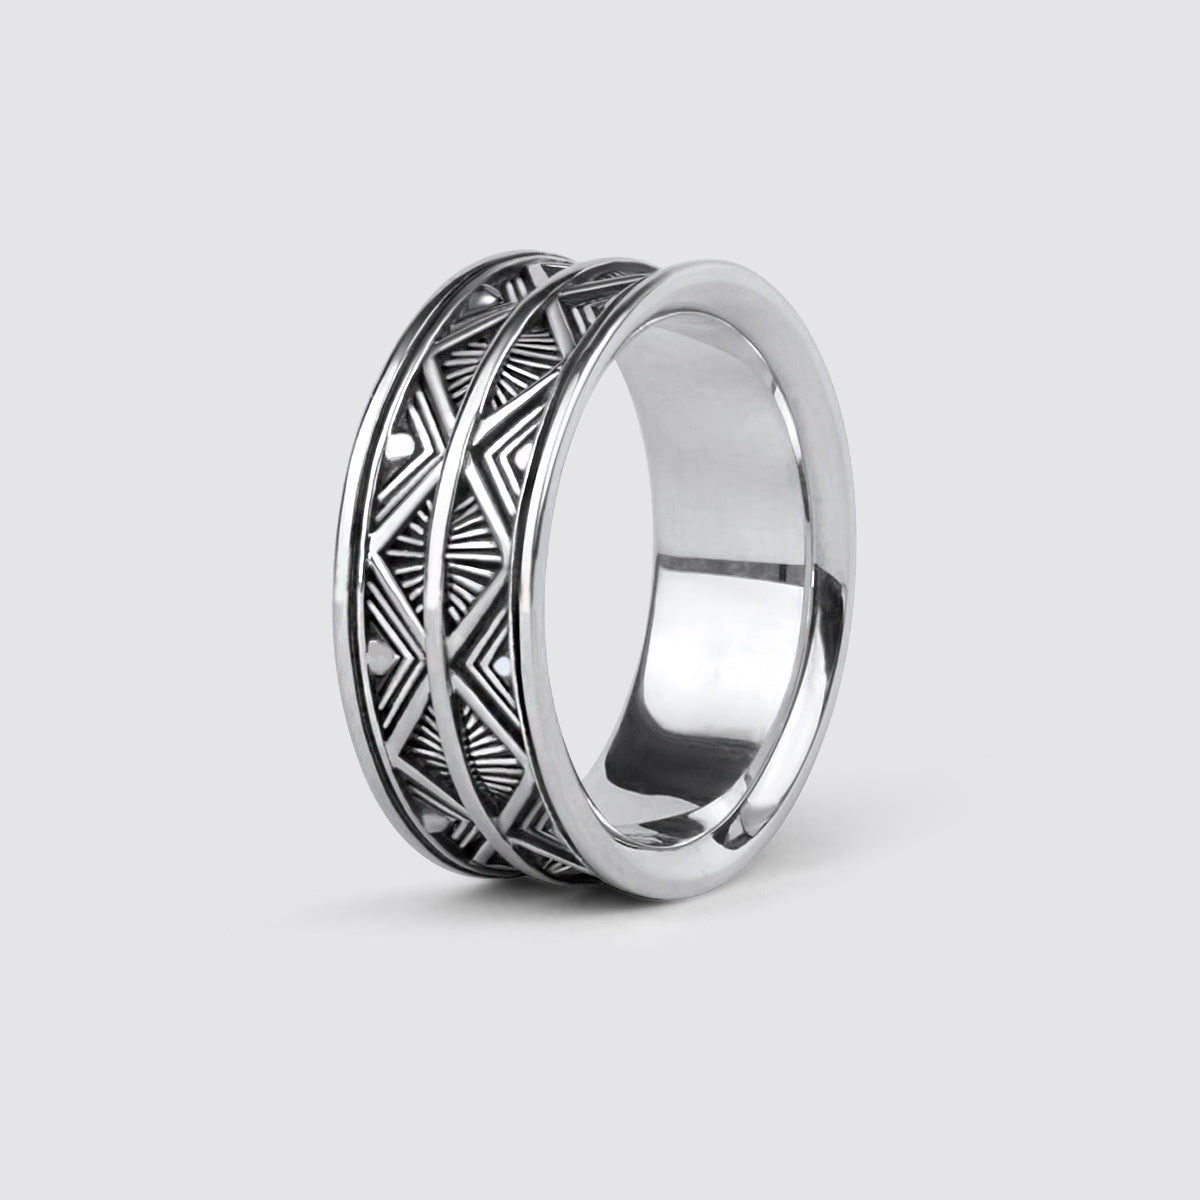 Basel - Oxidized Sterling Silver Ring 10mm